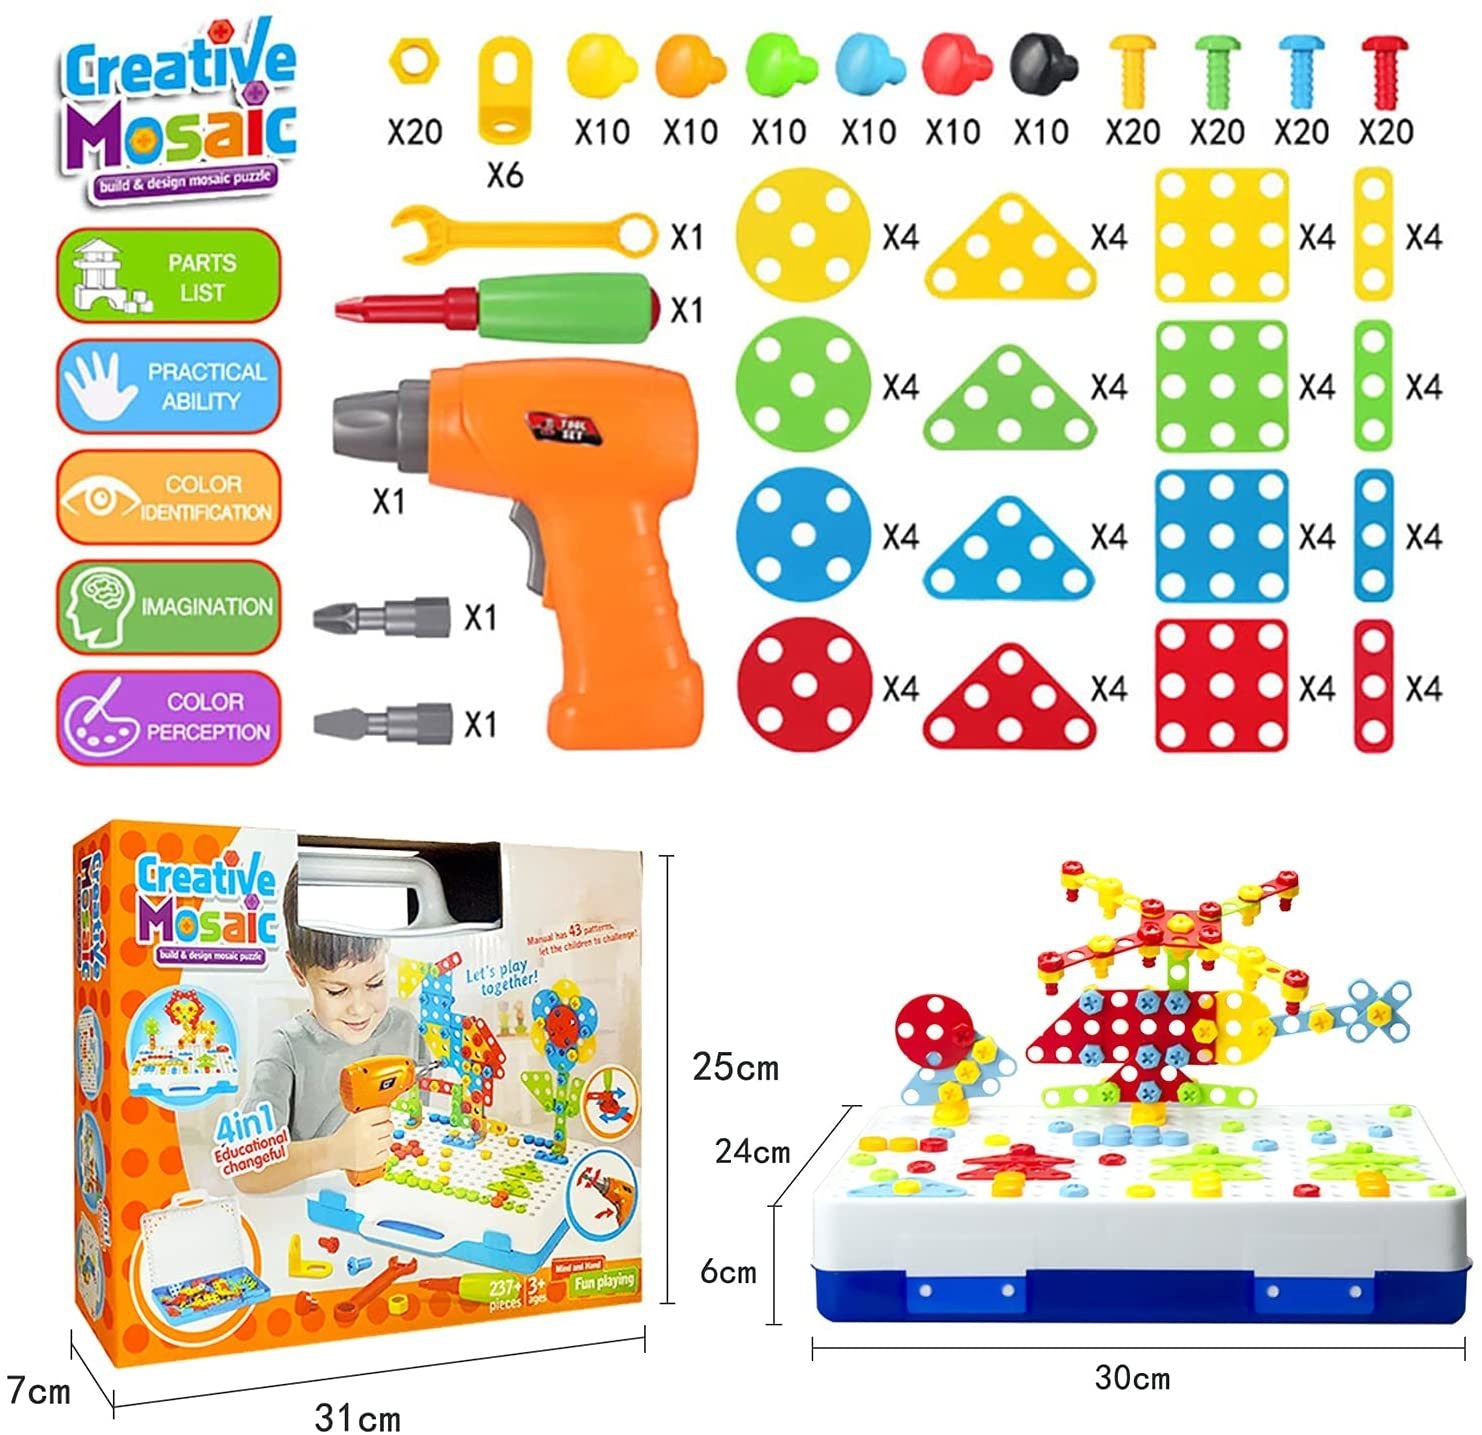 237 Pieces Creative Toy Drill Puzzle Set, STEM Learning Educational Toys, 3D Construction Engineering Building Blocks for Boys and Girls YJ